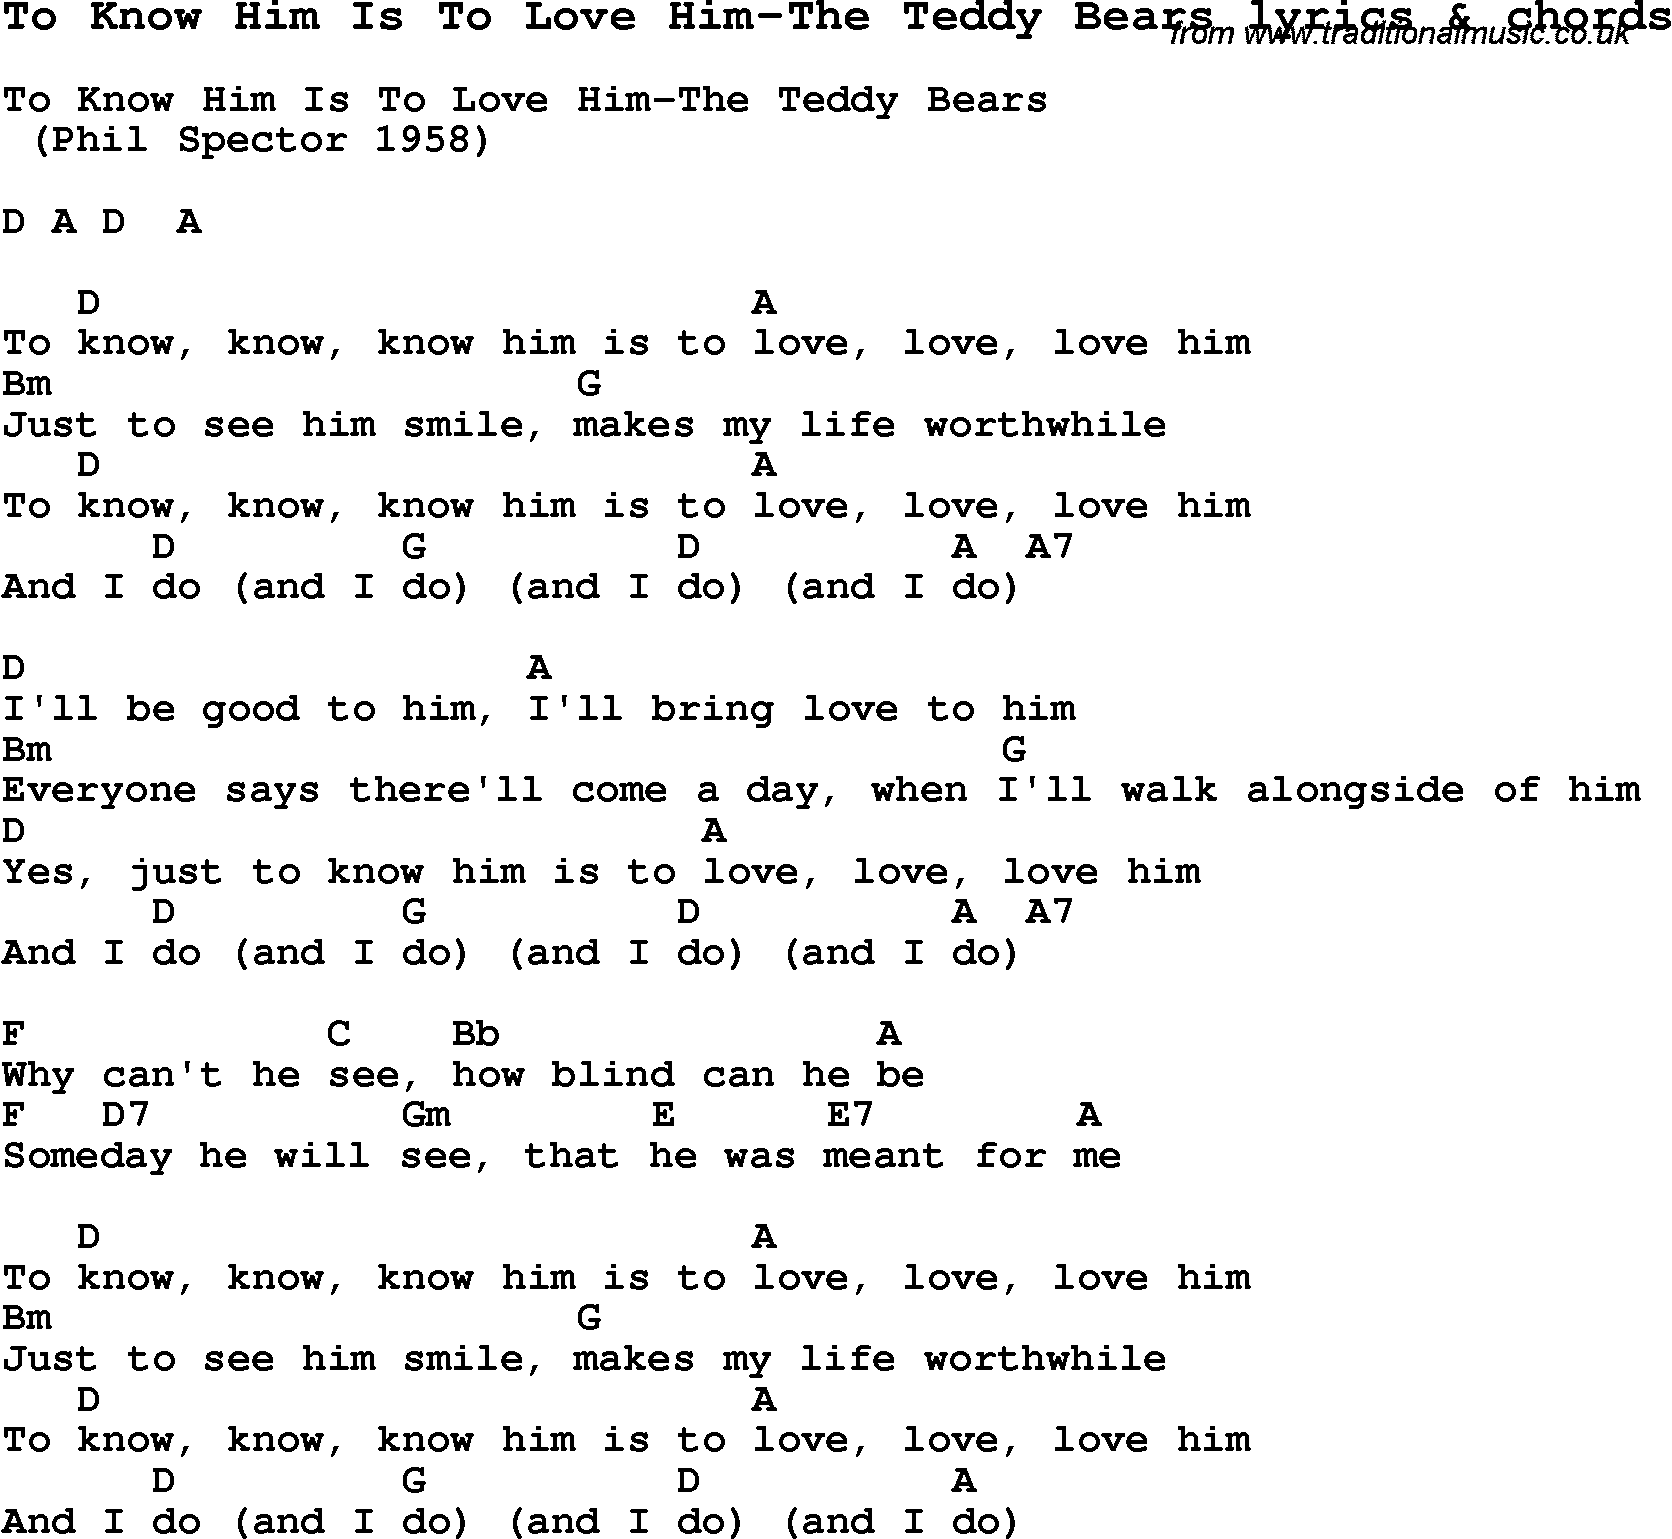 Love Song Lyrics for: To Know Him Is To Love Him-The Teddy Bears with chords for Ukulele, Guitar Banjo etc.